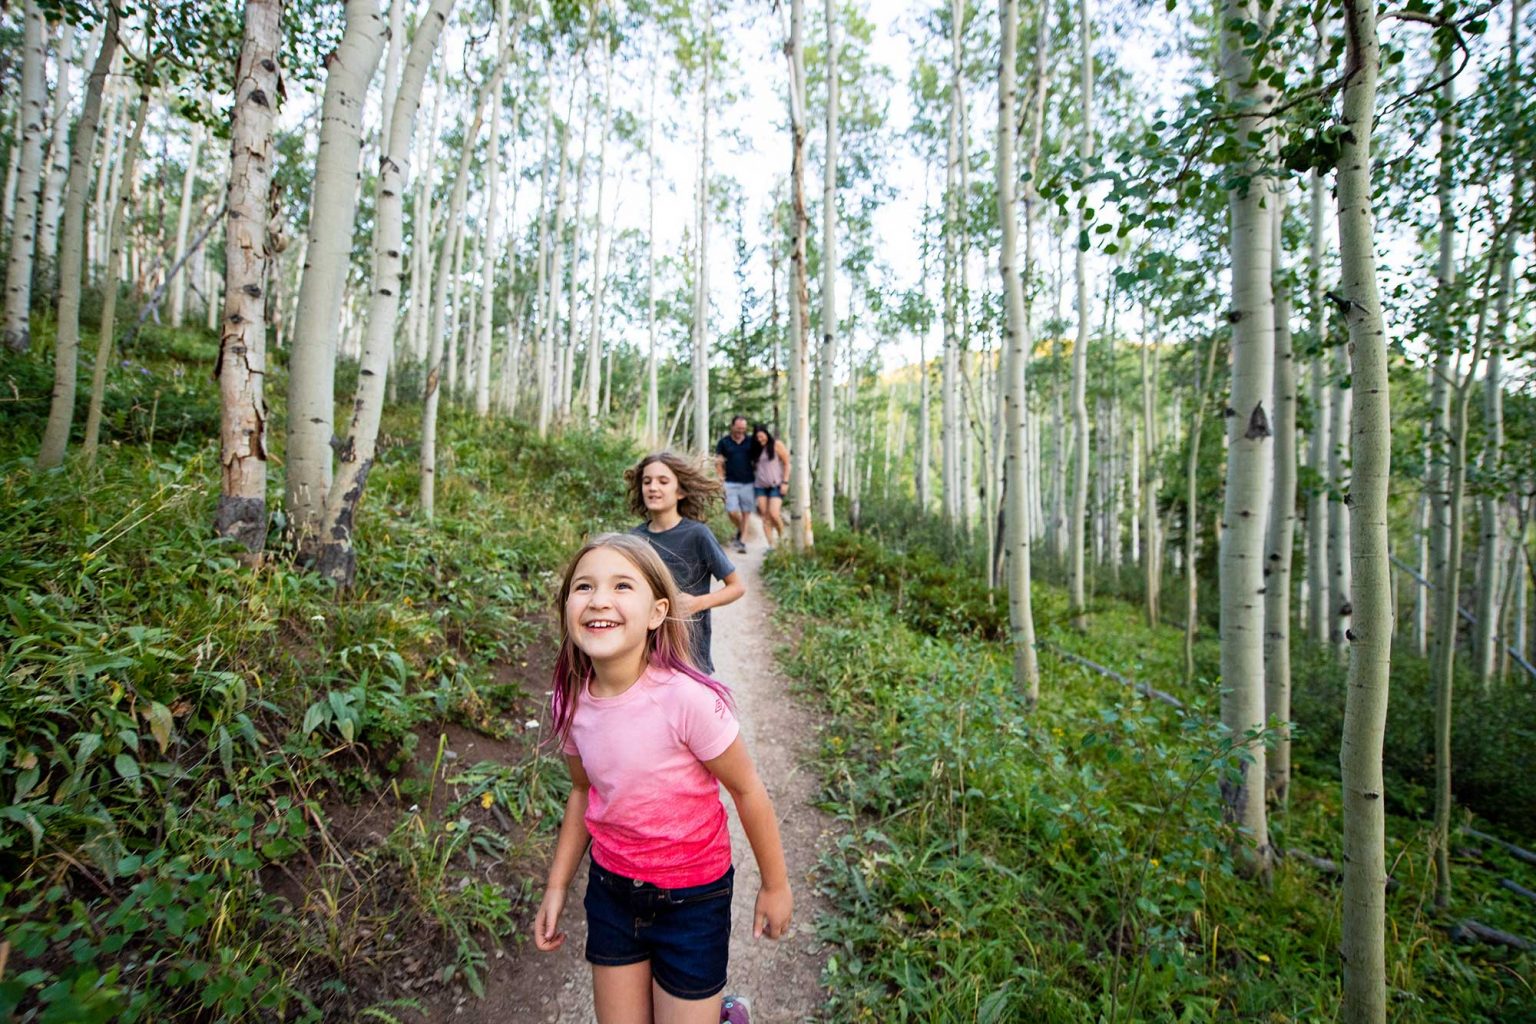 Family hiking in. Breckenridge during the summer